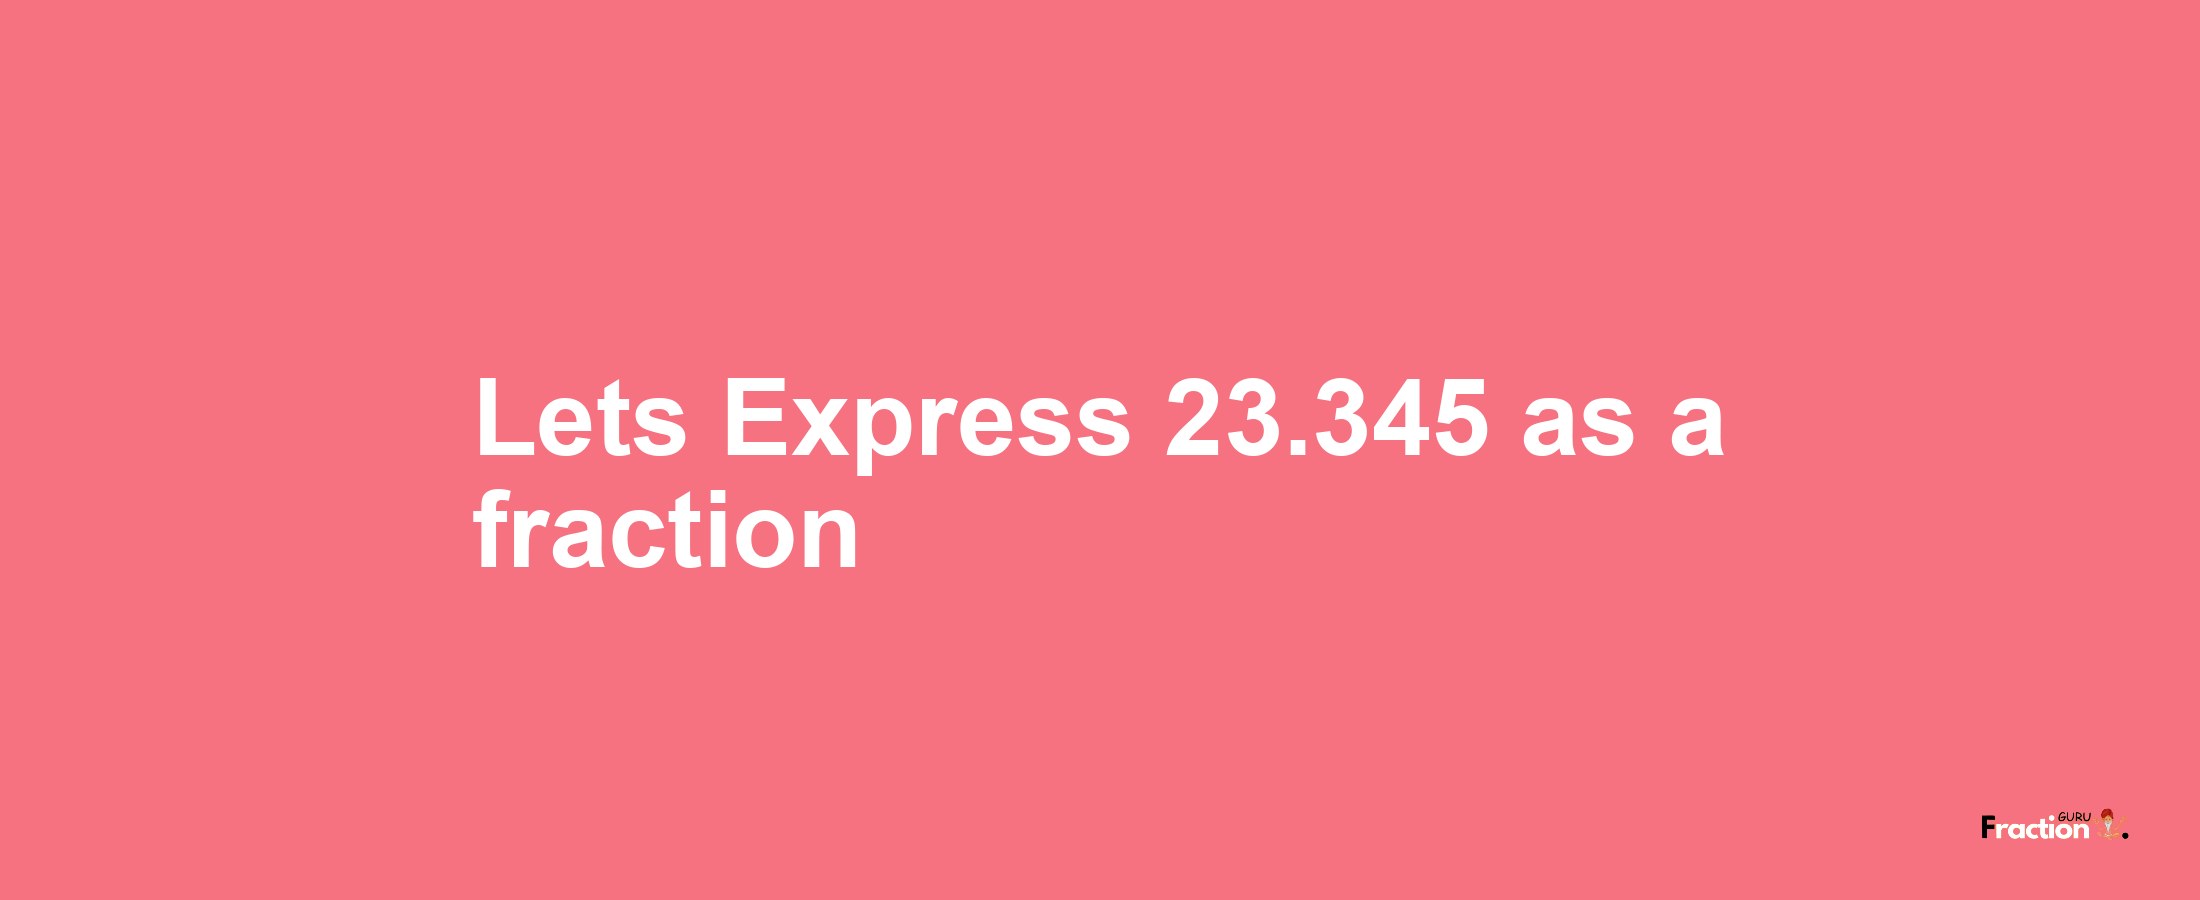 Lets Express 23.345 as afraction